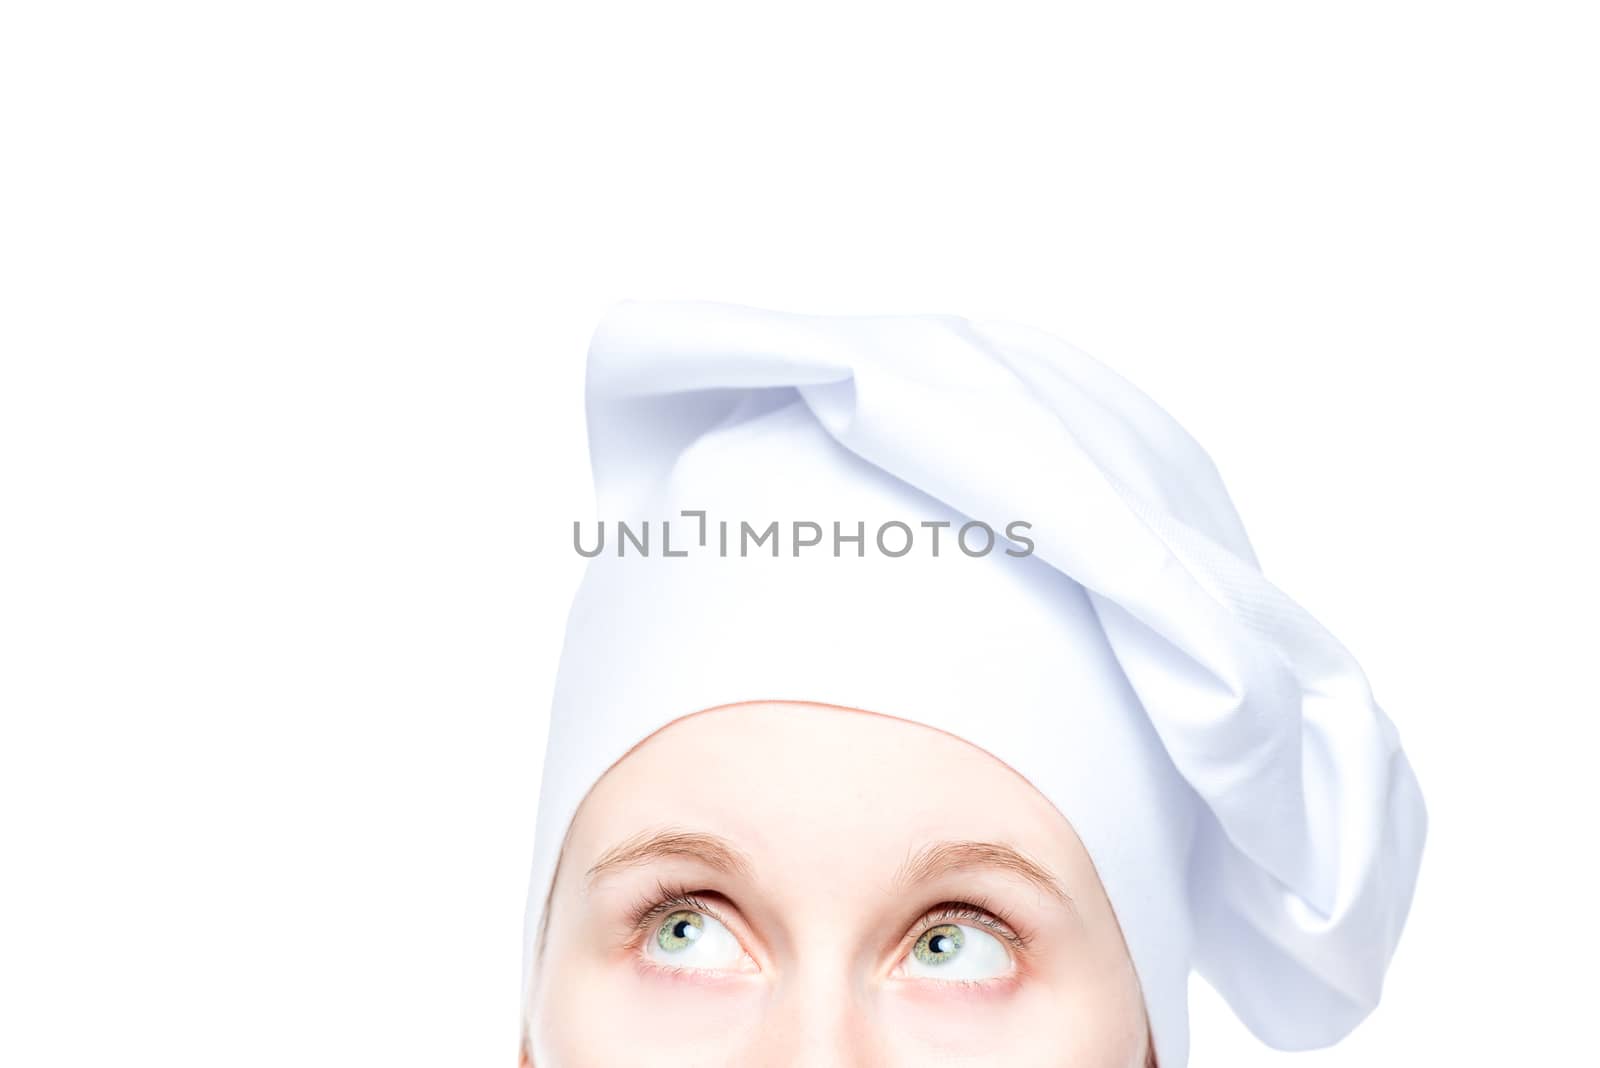 eyes of cook in hat close up on white background